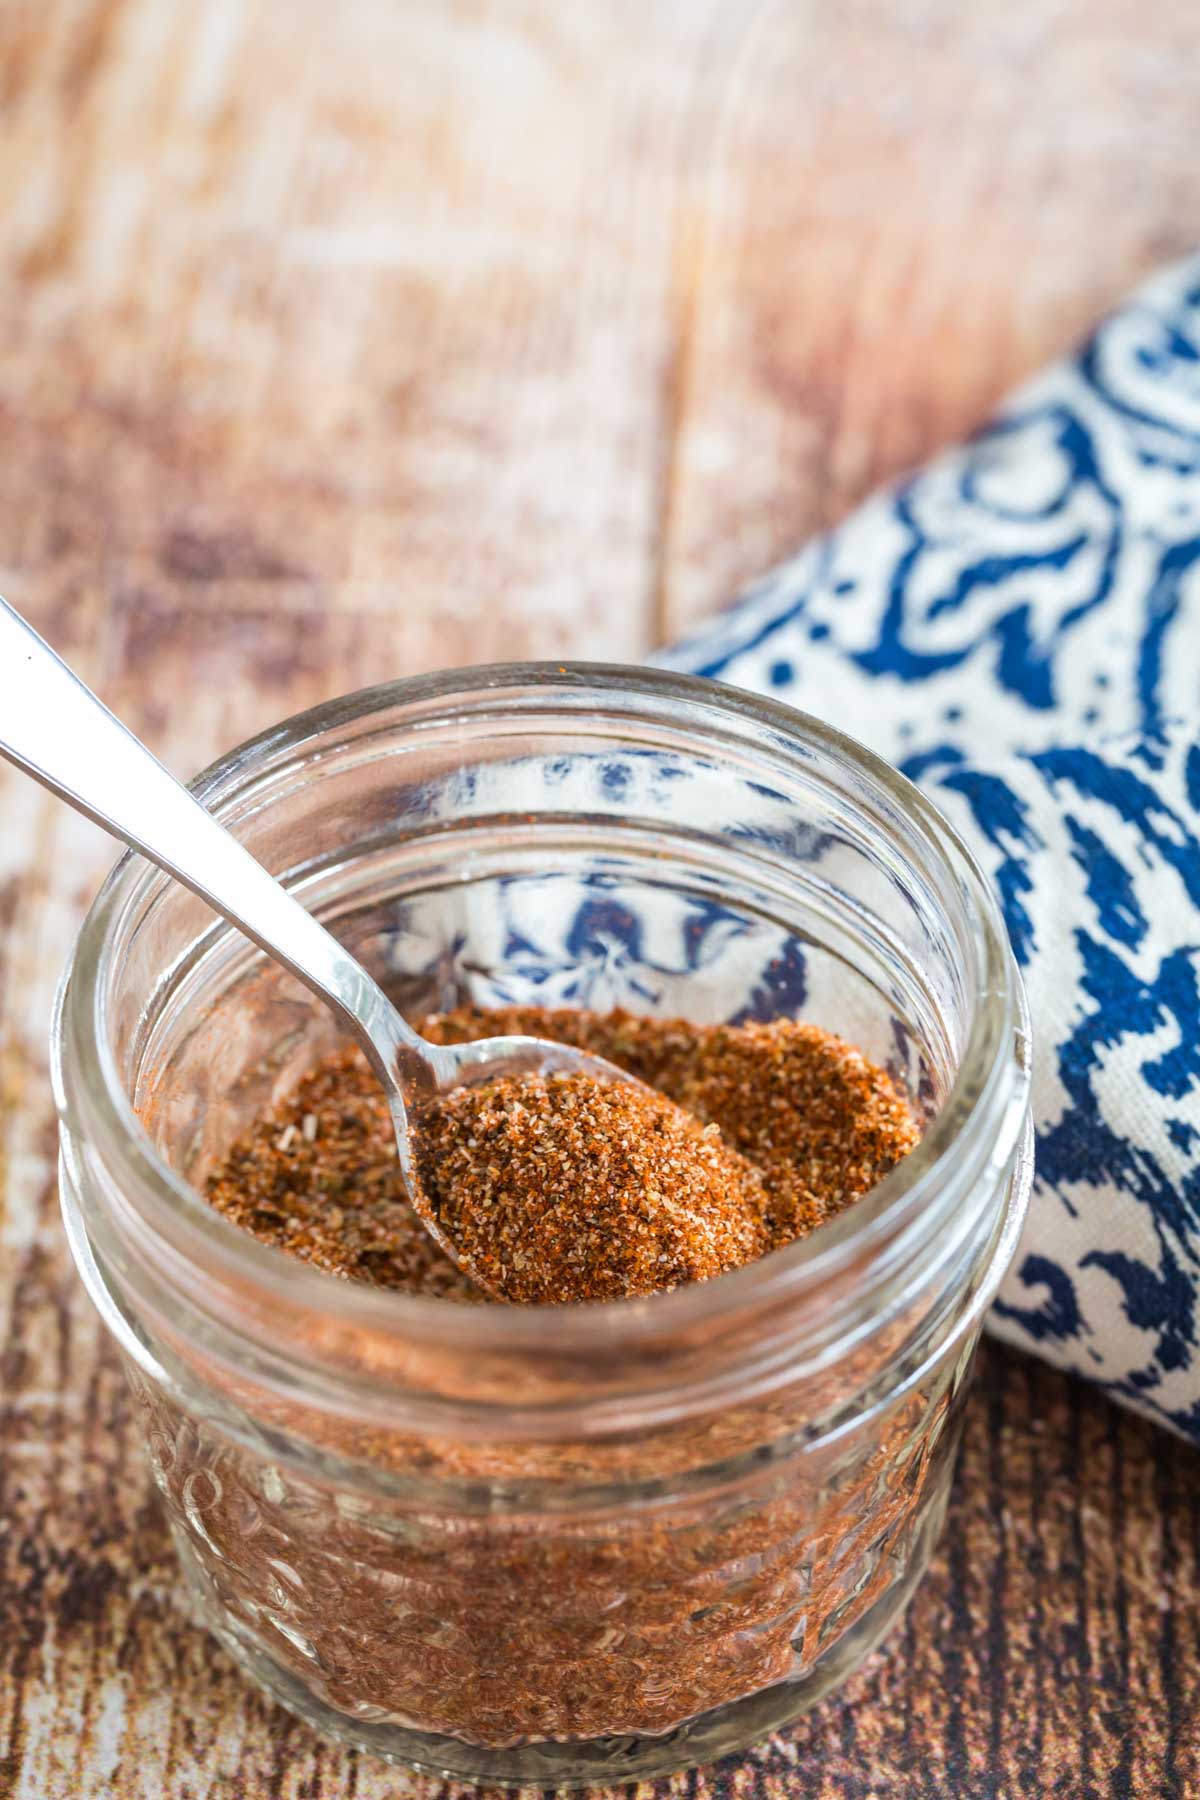 Blackening spice in a jar with a spoon.